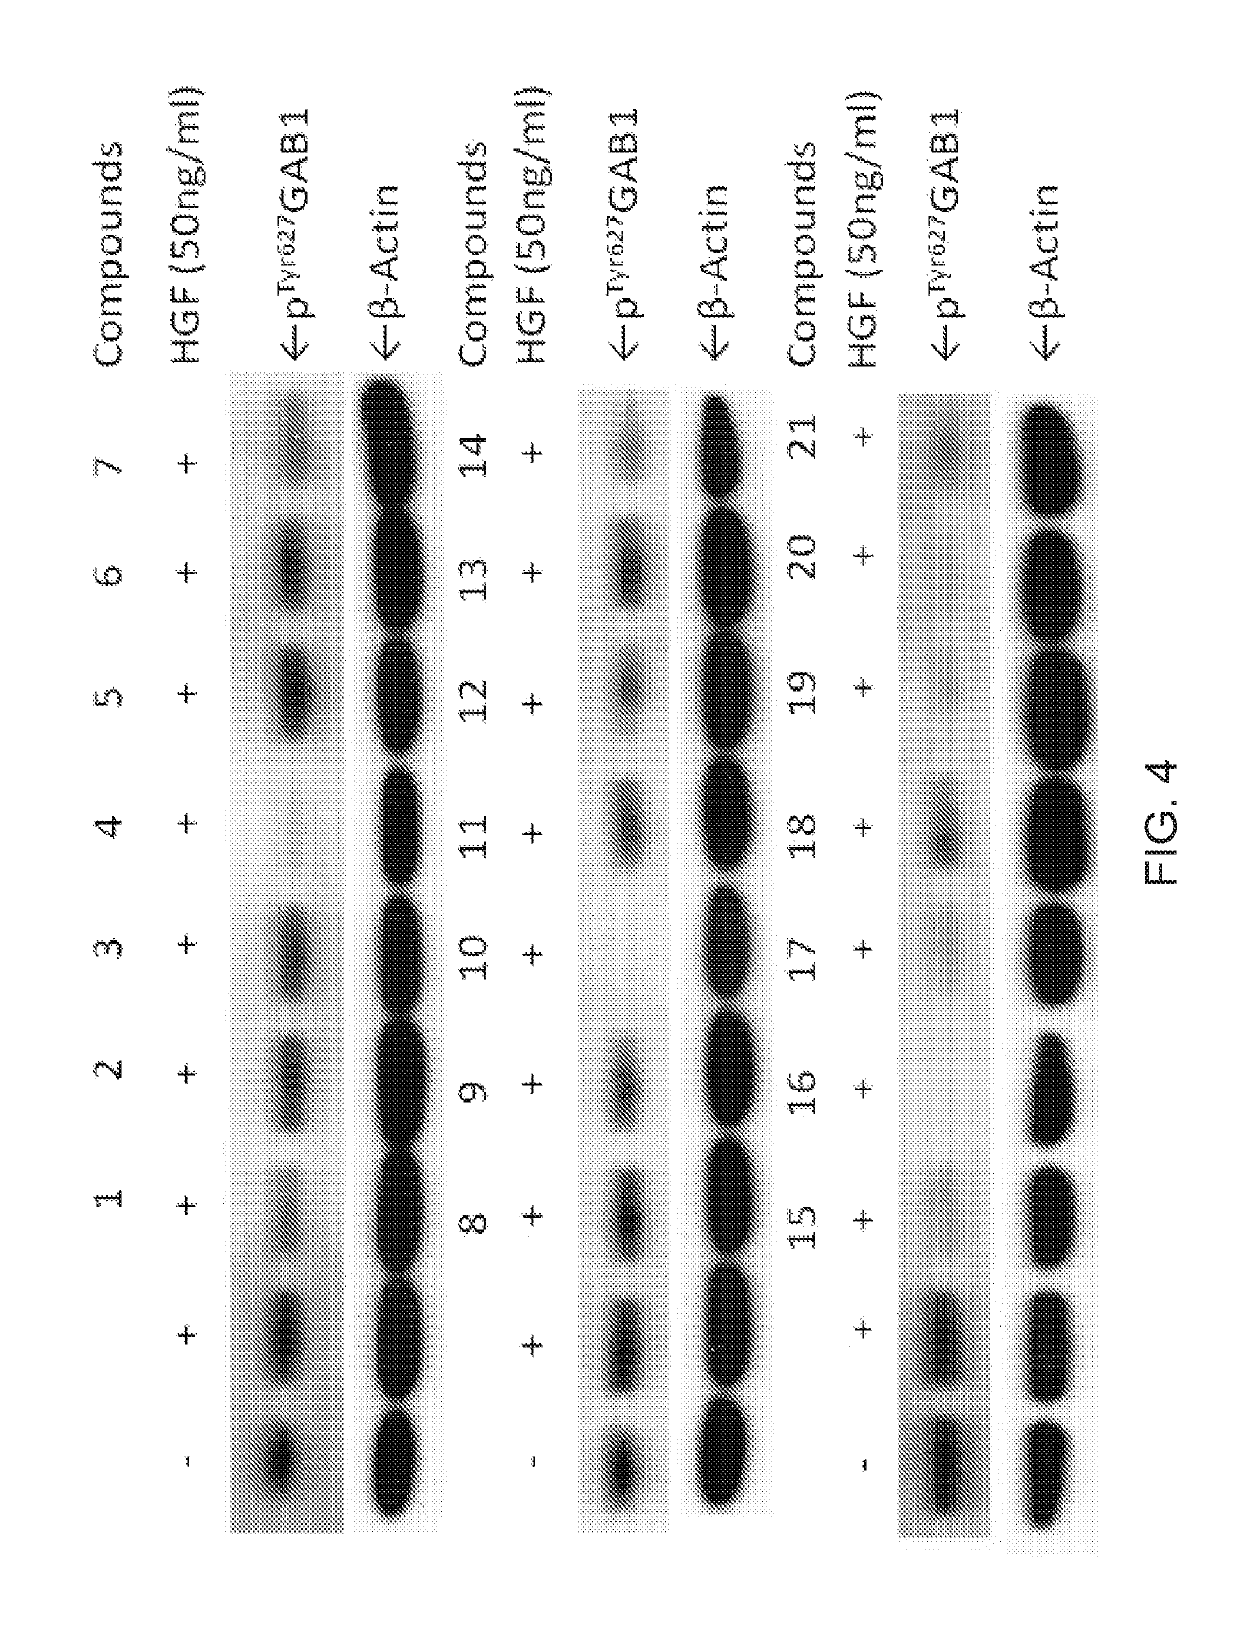 Inhibitors of GRB2-associated binding protein 1 (GAB1) and methods of treating cancer using the same